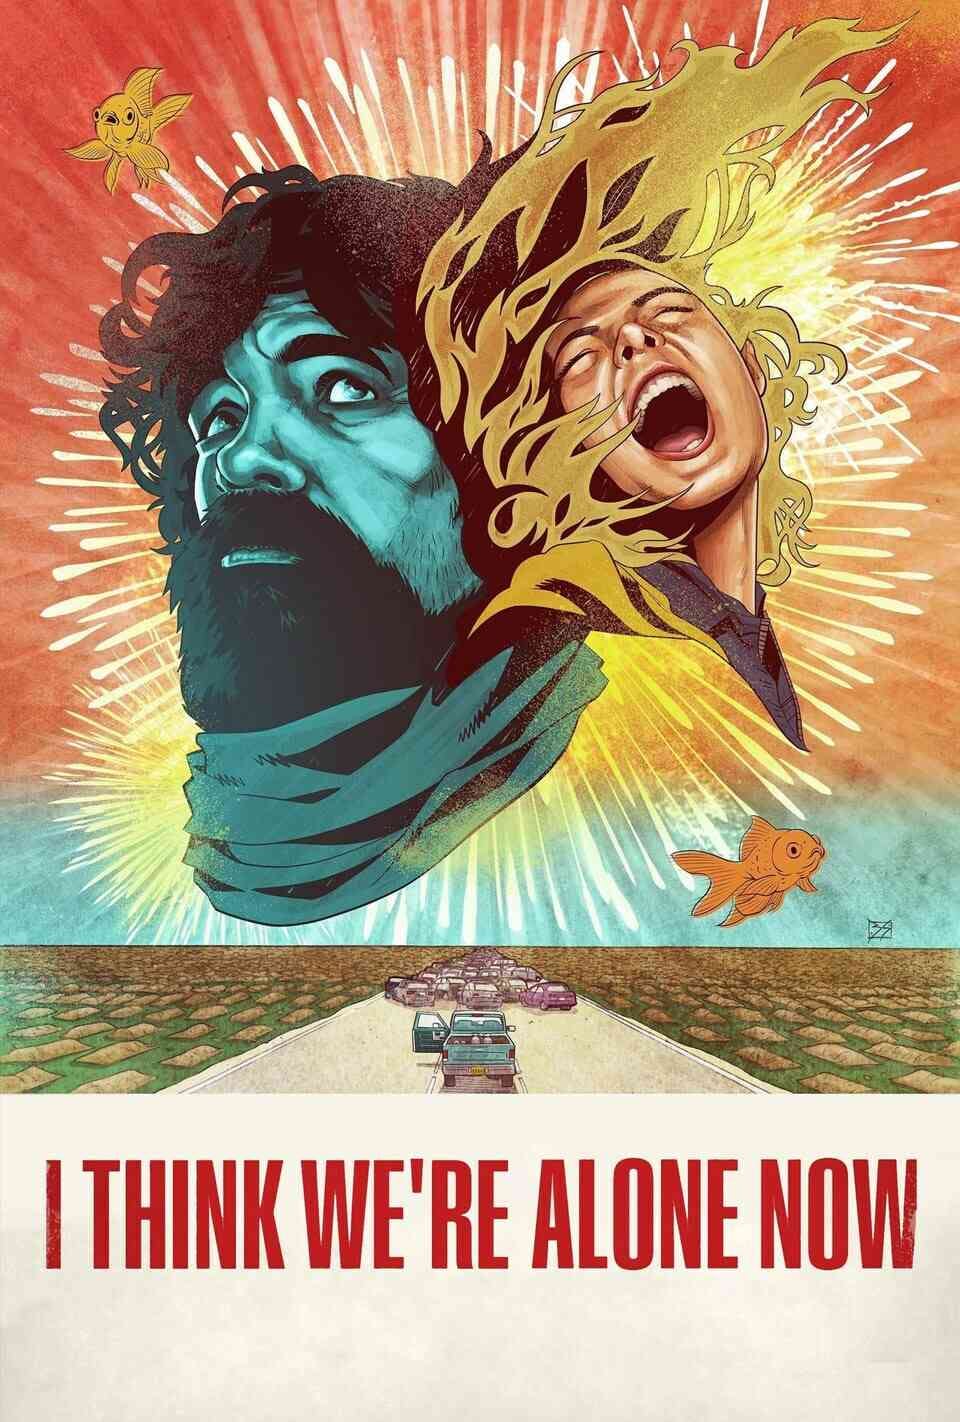 Read I Think We're Alone Now screenplay (poster)